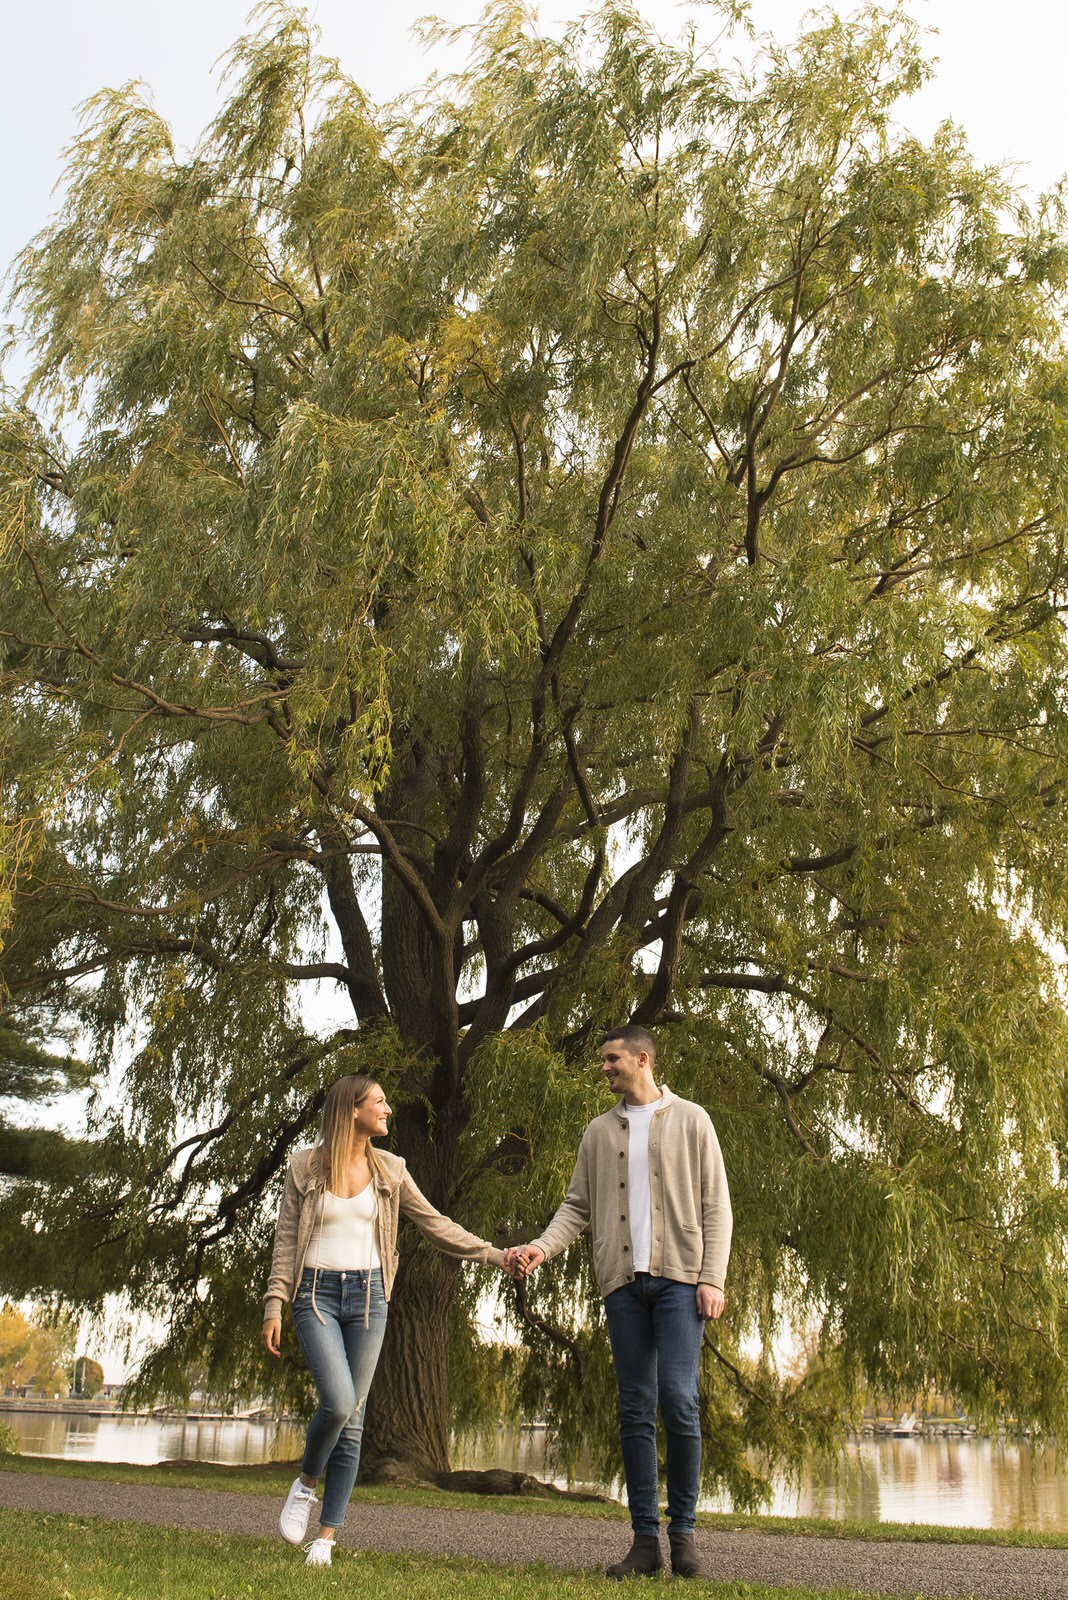 suzy rossdeutscher greg kirstein jeans casual engagement esession prewedding photoshoot shoot tree lachine canal jewish young trendy romantic couple